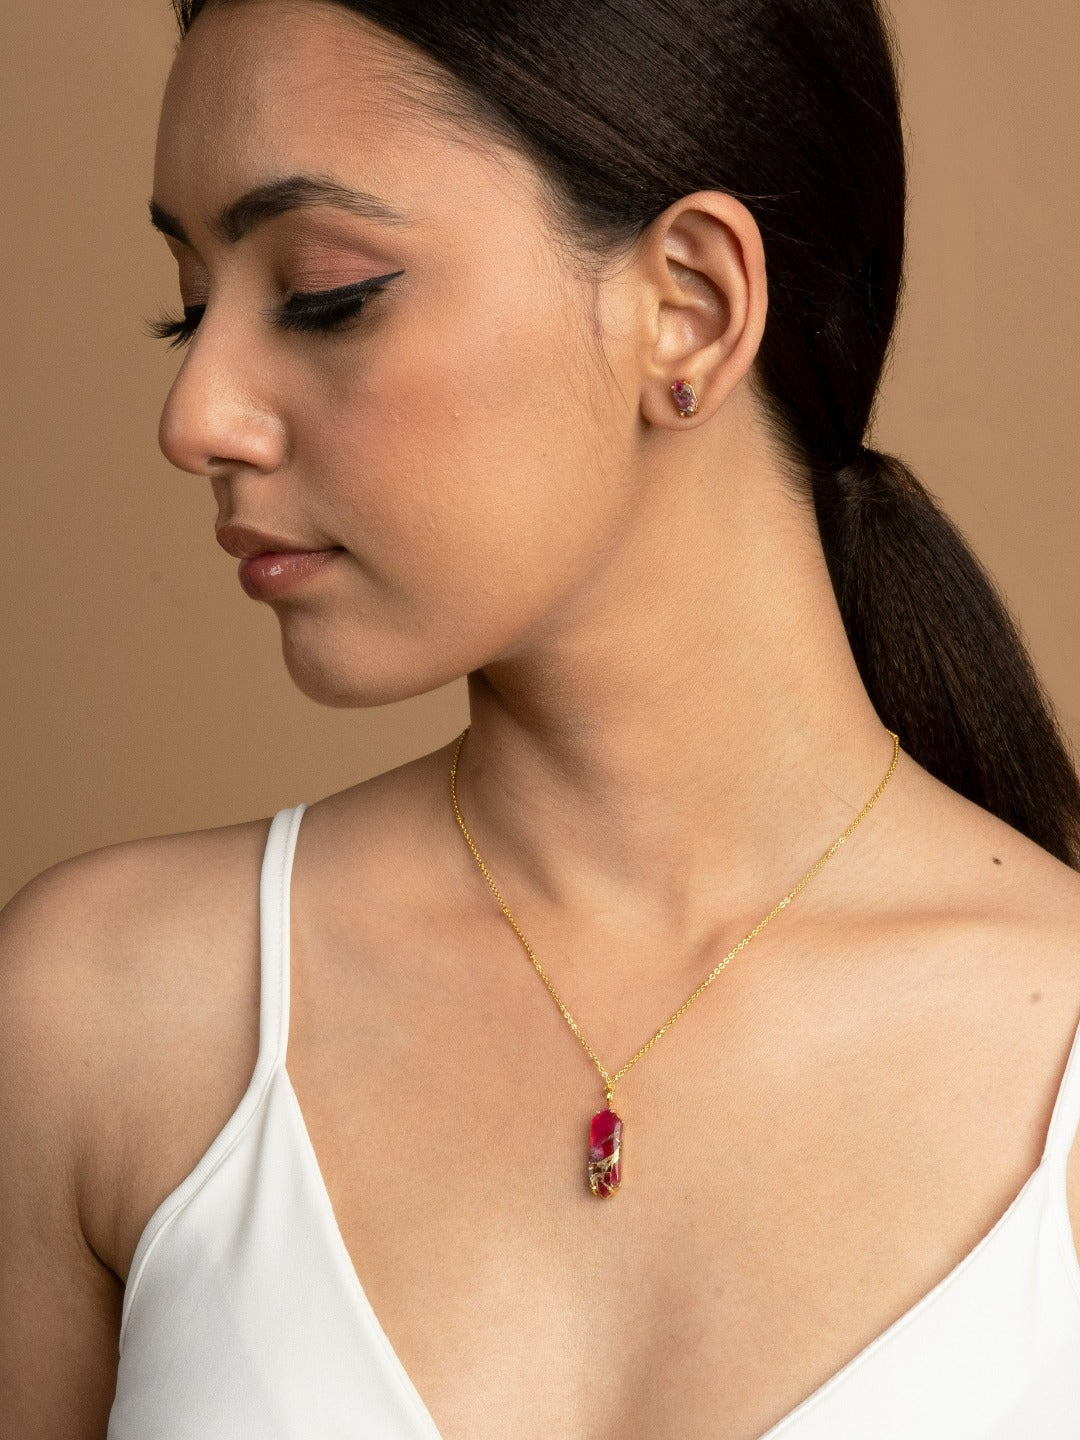 Bullet shaped small ruby red pendant with stud earrings